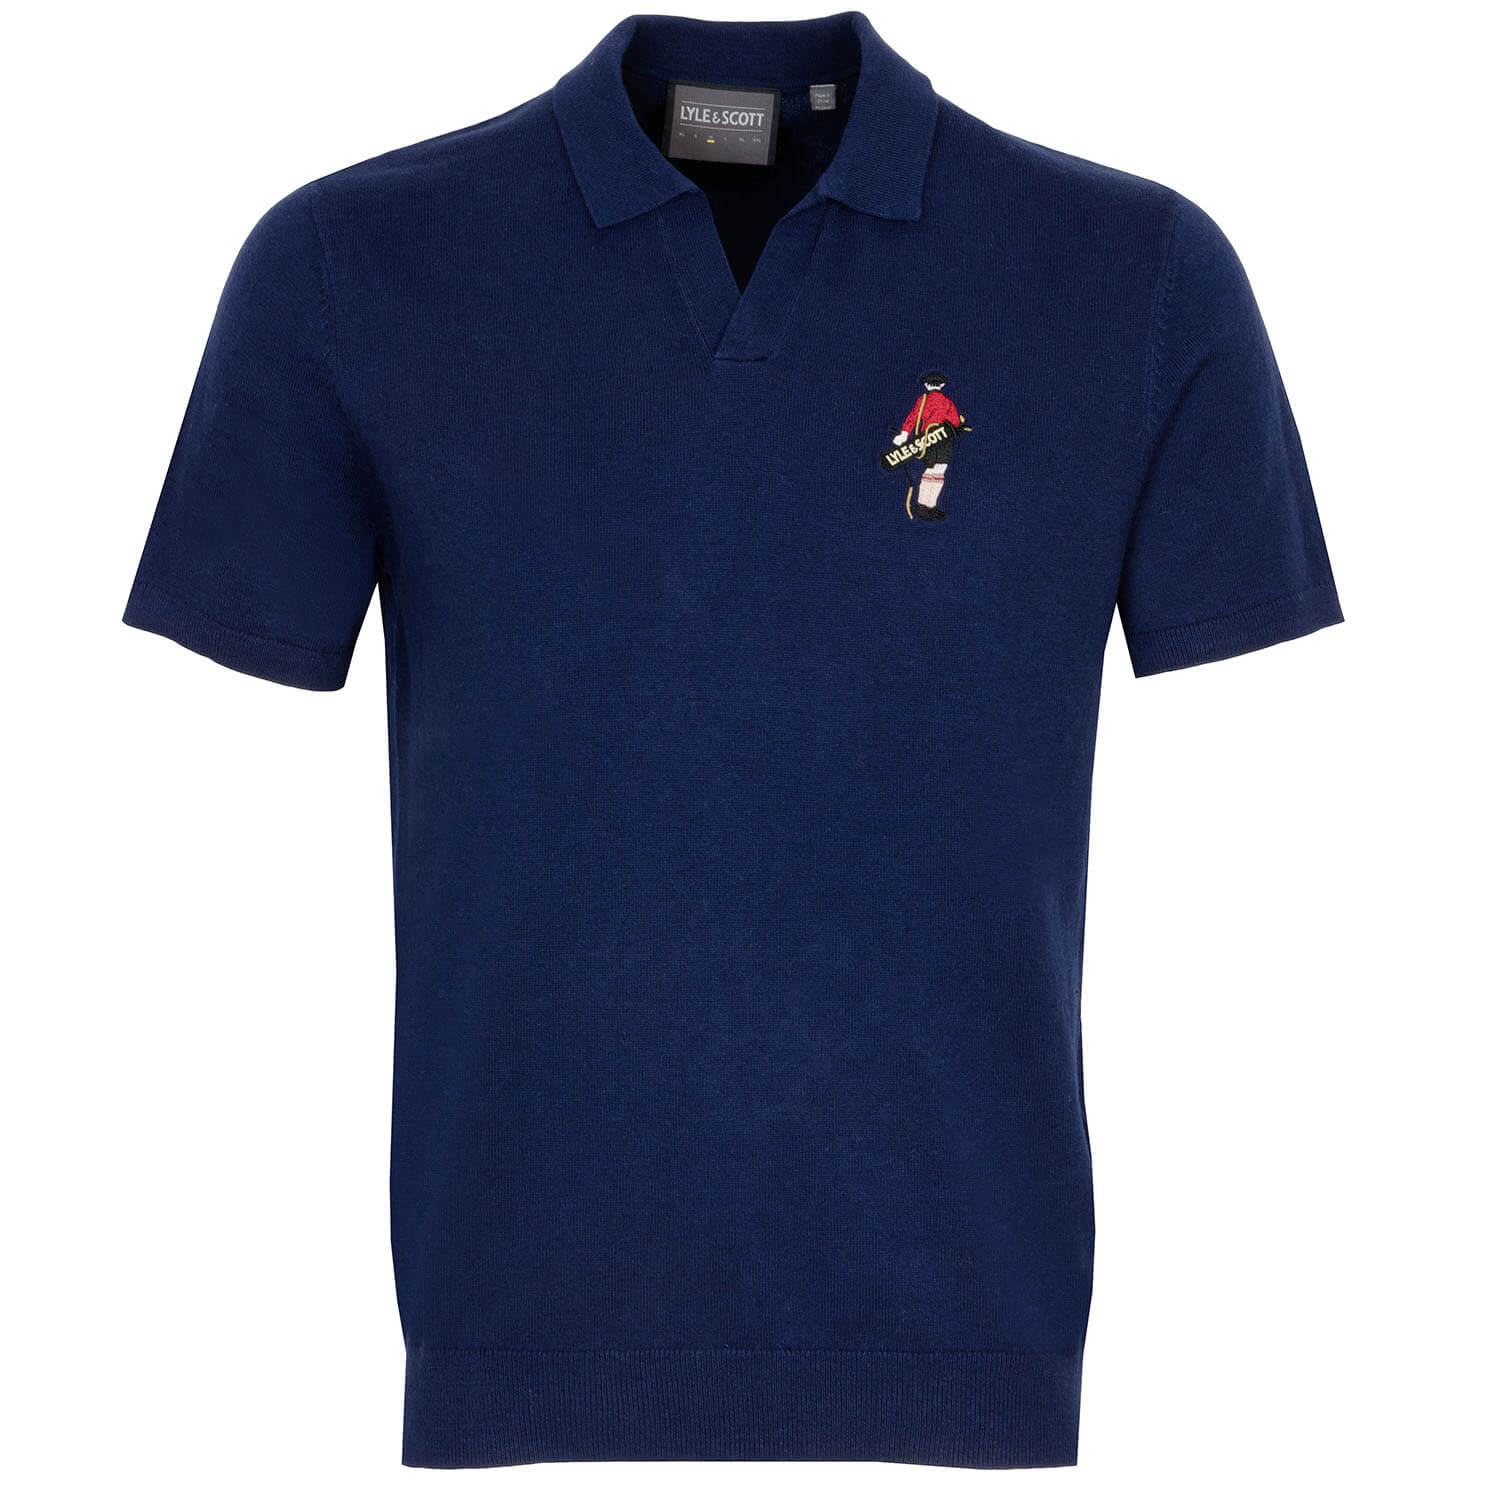 Lyle & Scott Player Knitted Polo Shirt